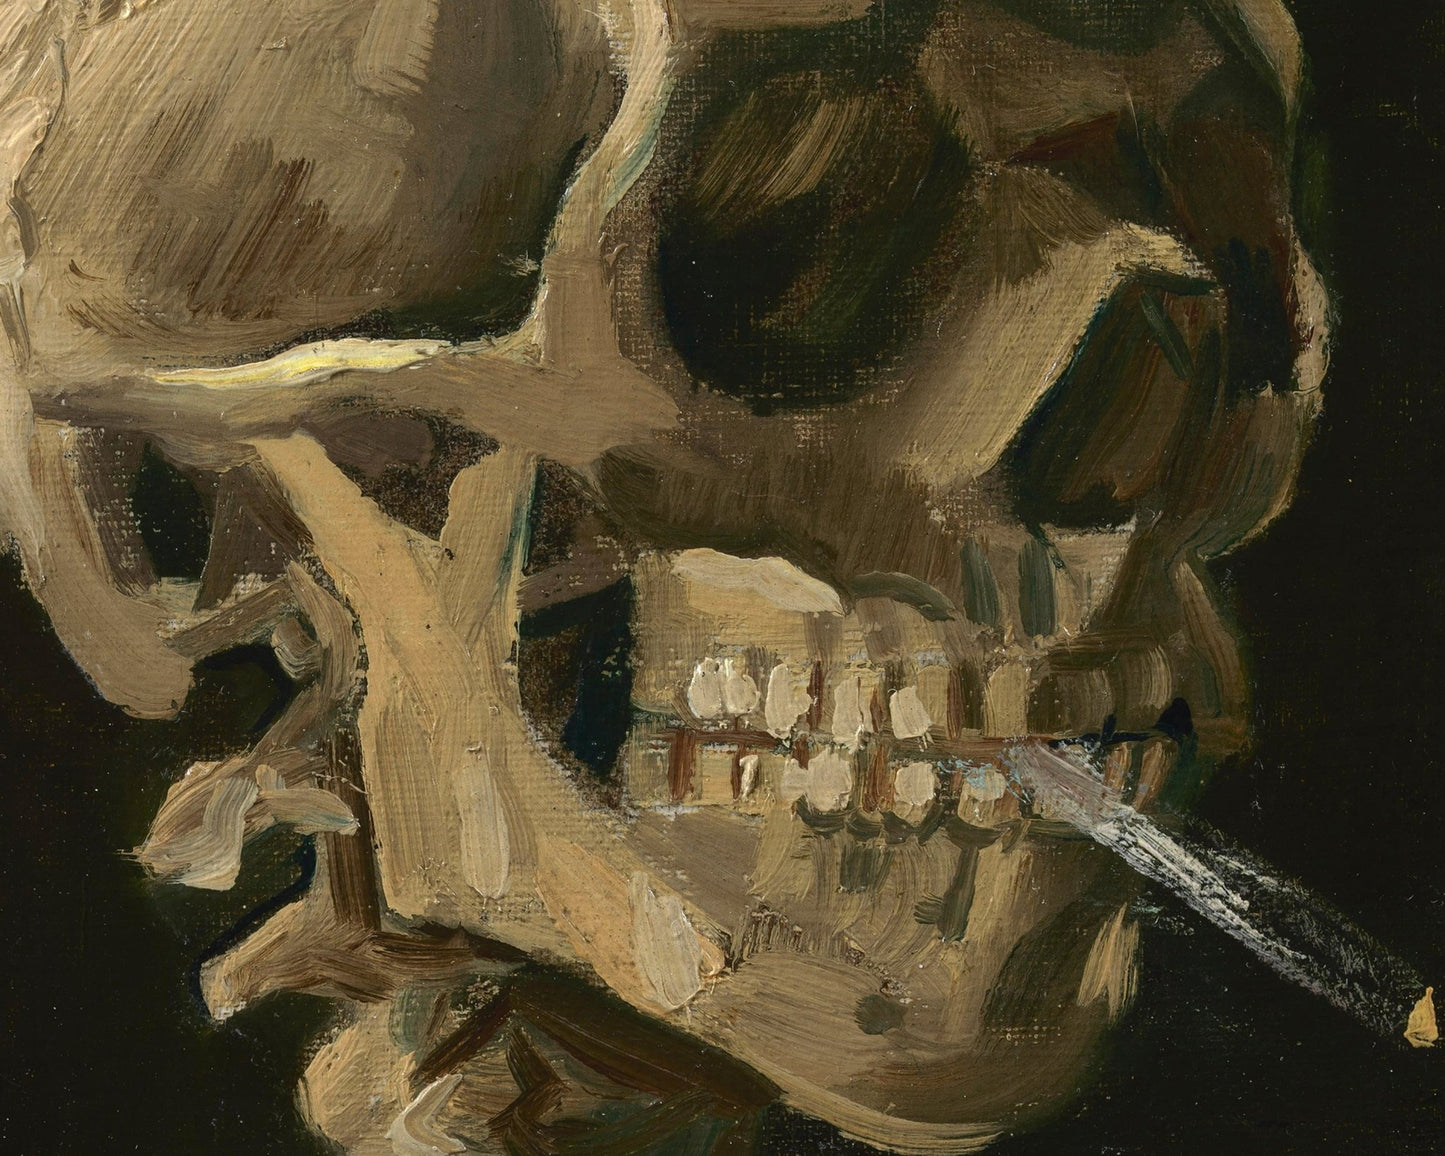 Vincent Van Gogh "Head of a Skeleton with a Burning Cigarette" (c.1886) - Mabon Gallery